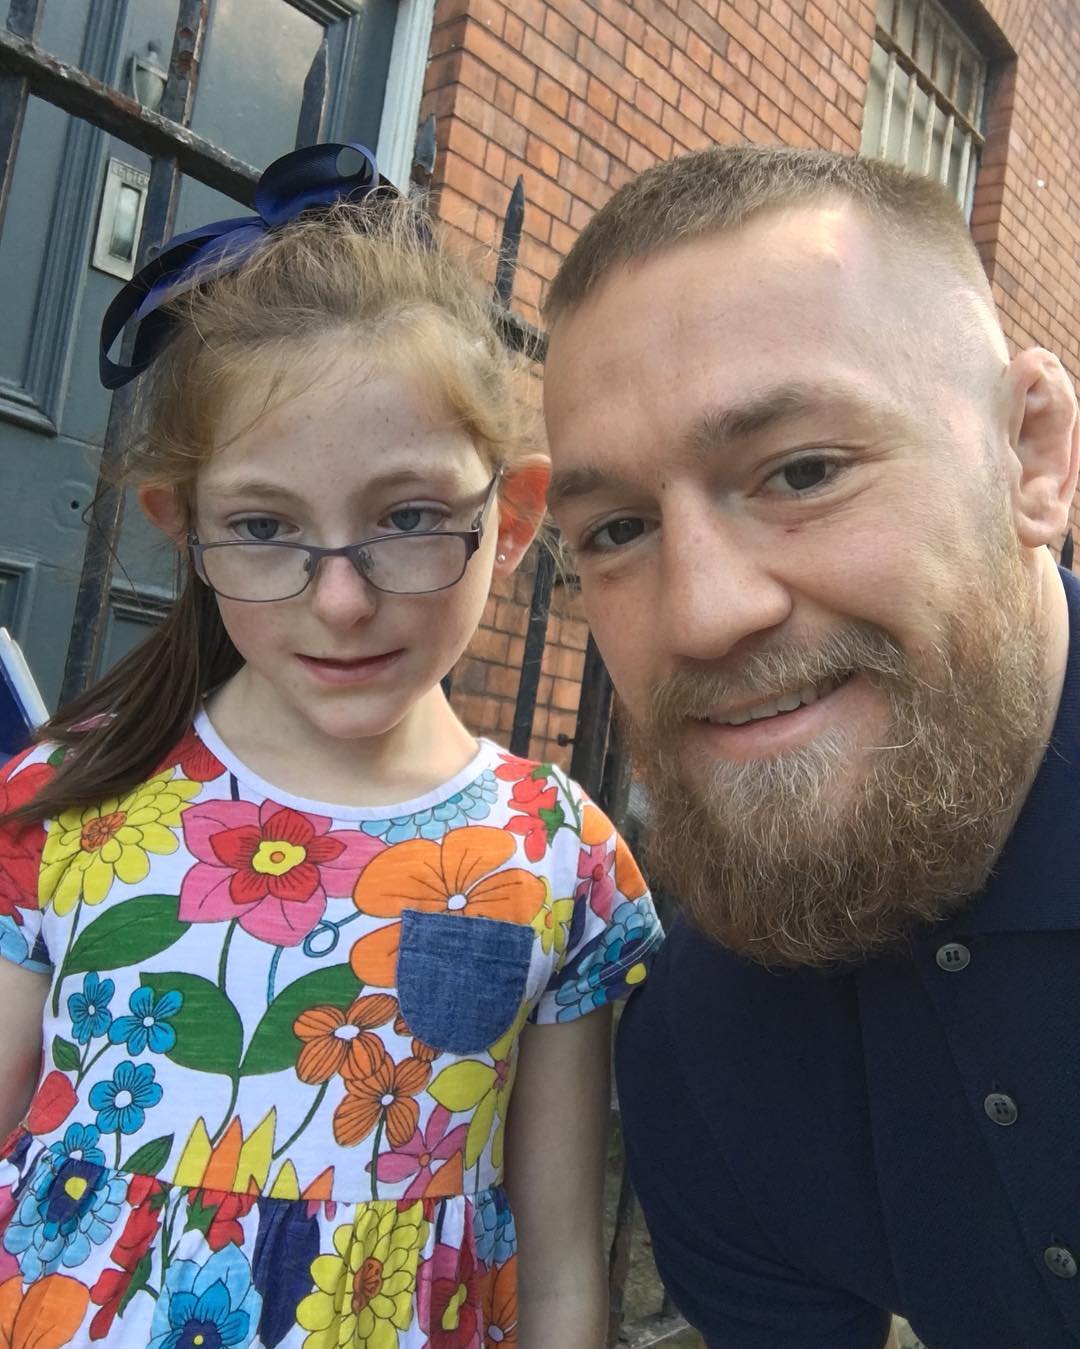 Conor McGregor posted this on his Instagram…Respect.

"To the little lady who left her phone at home."